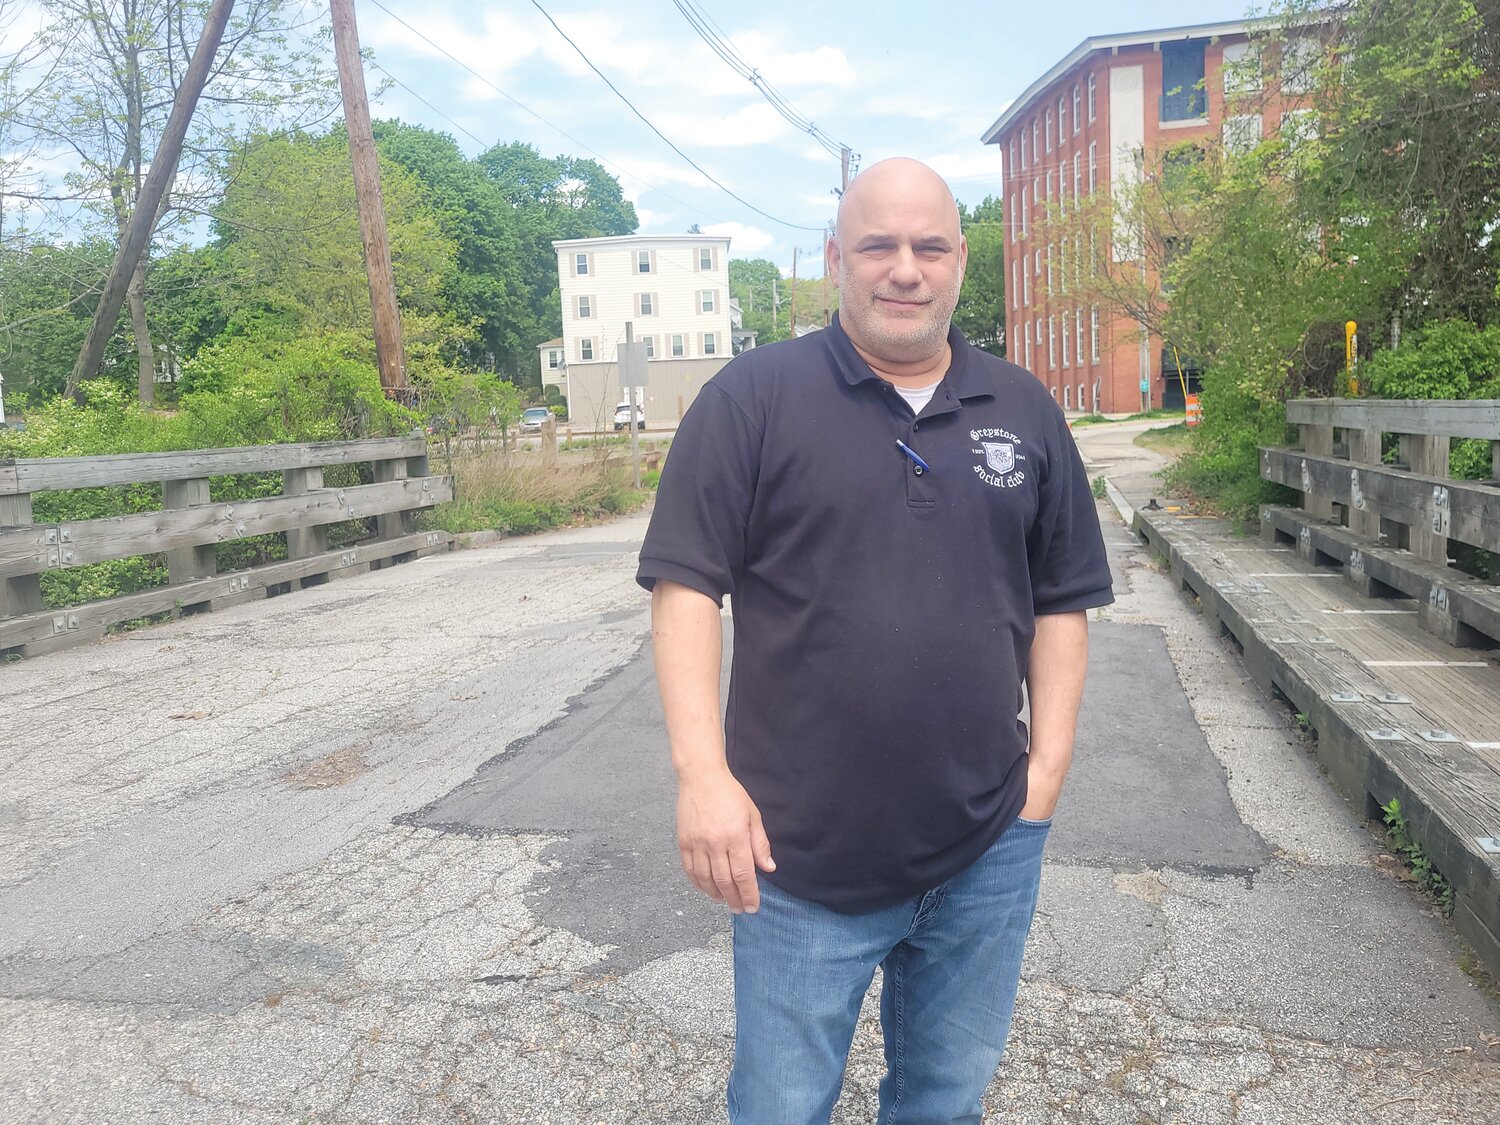 HEART OF GRANITEVILLE: Chris Gosetti, President of the Greystone Social Club, has been urging elected leaders in Johnston and North Providence to join efforts to reopen the Greystone Sluiceway Bridge which has been closed since 2020.